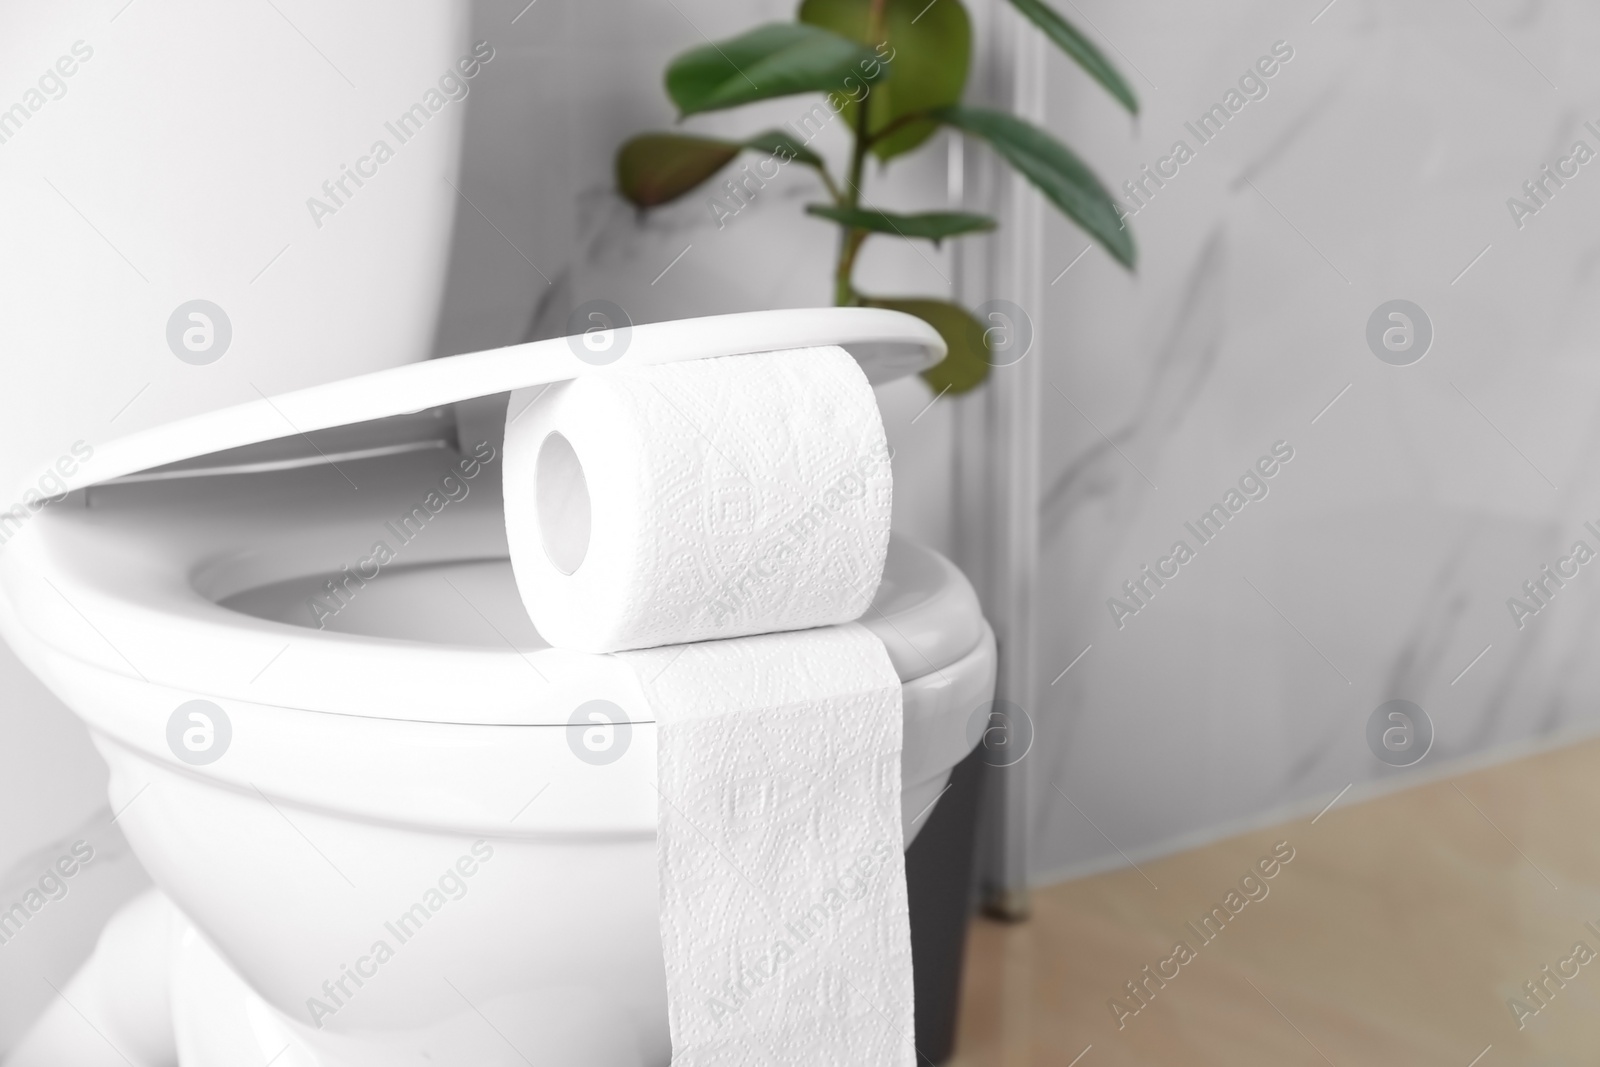 Photo of New paper roll on toilet seat in bathroom